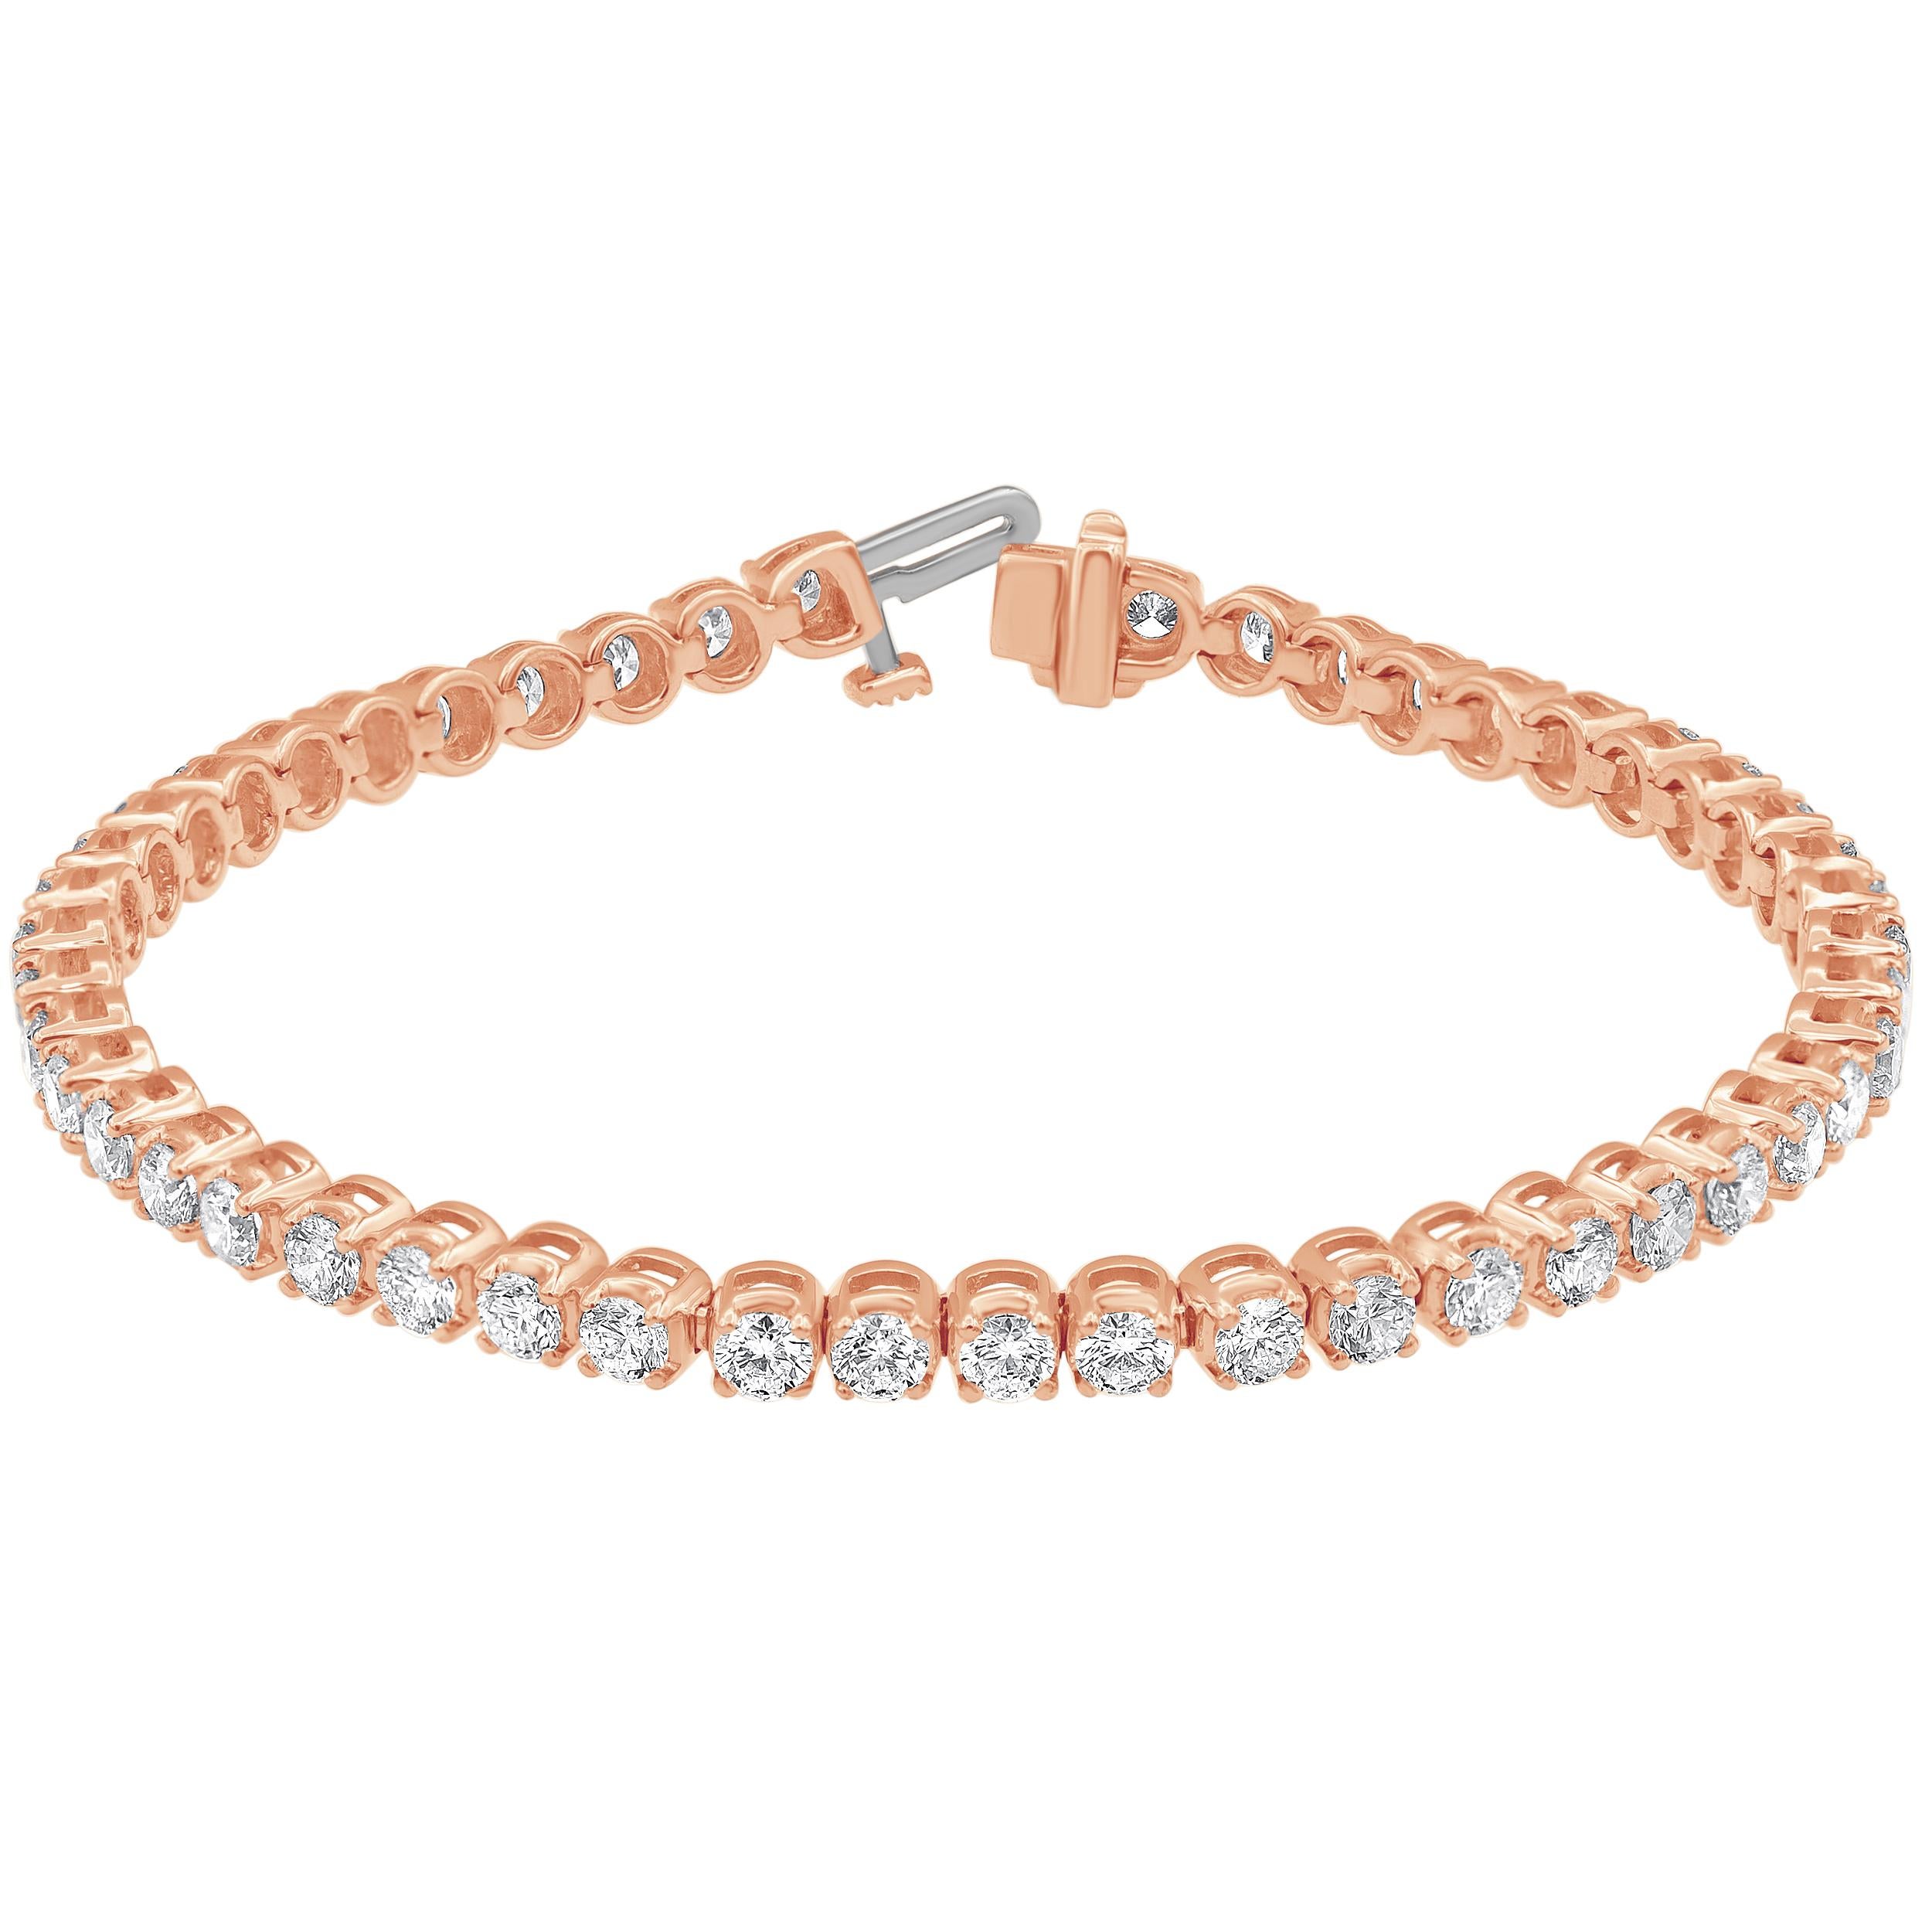 Your evening look isn't complete without this splendid diamond tennis bracelet. Fashioned in 14K rose gold, this timeless design features sparkling 1/10 ct. diamonds - each with a color rank of H-I and clarity of I1 - in a luxurious row. Resplendent